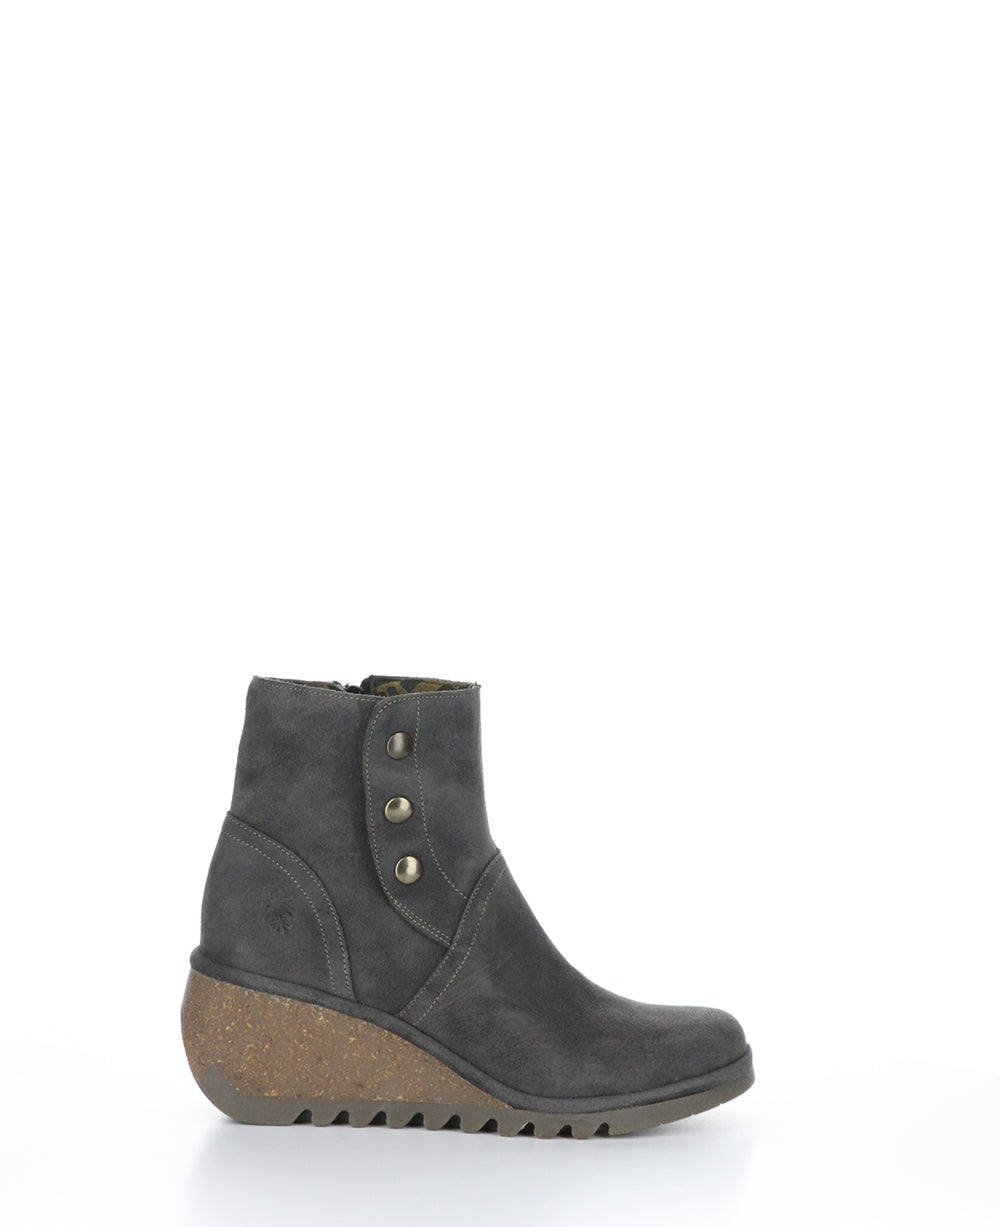 NERY336FLY Diesel Zip Up Ankle Boots|NERY336FLY Bottines avec Fermeture Zippée in Bleu